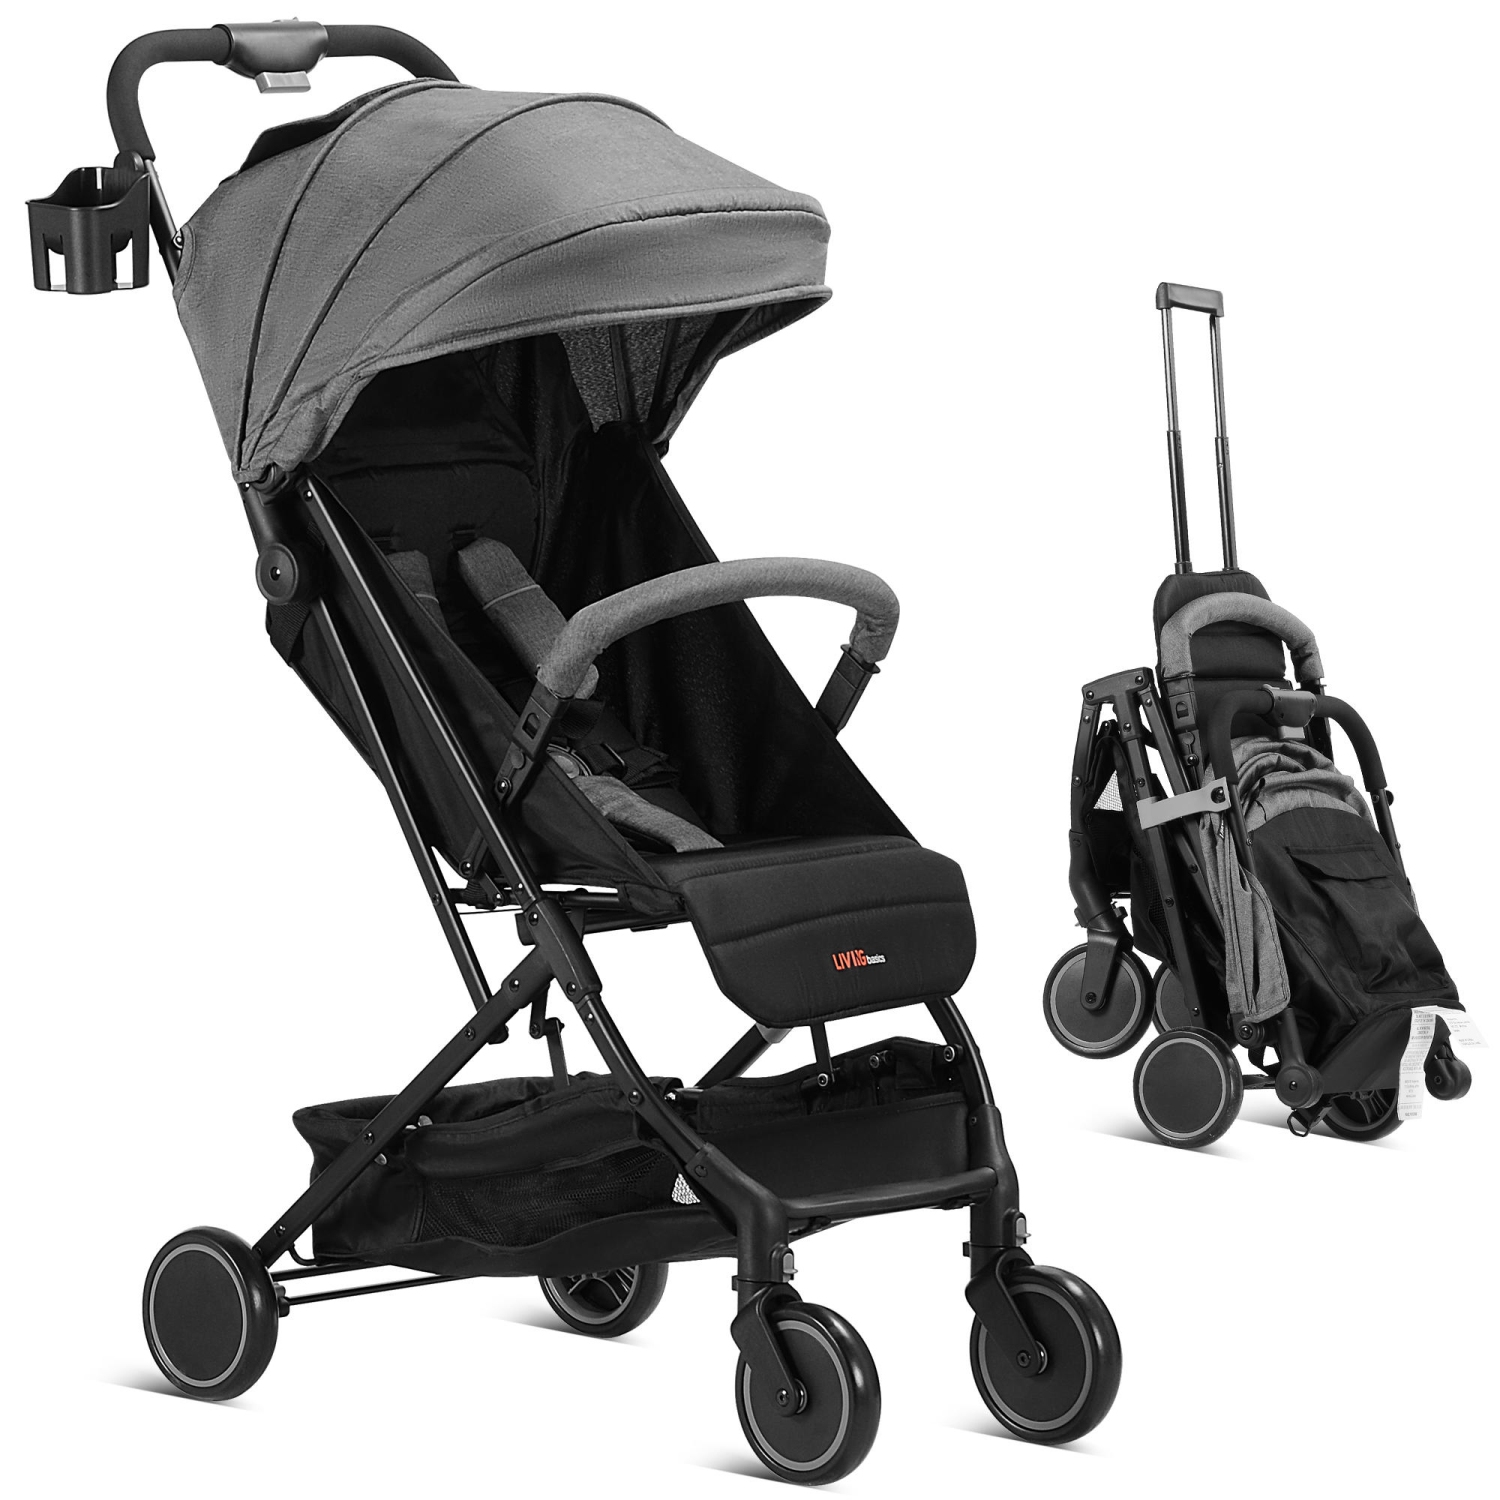 2 in 1 Convertible Portable Lightweight Baby Stroller, Foldable Compact Stroller with Pop Out Sun Visor and Storage Basket